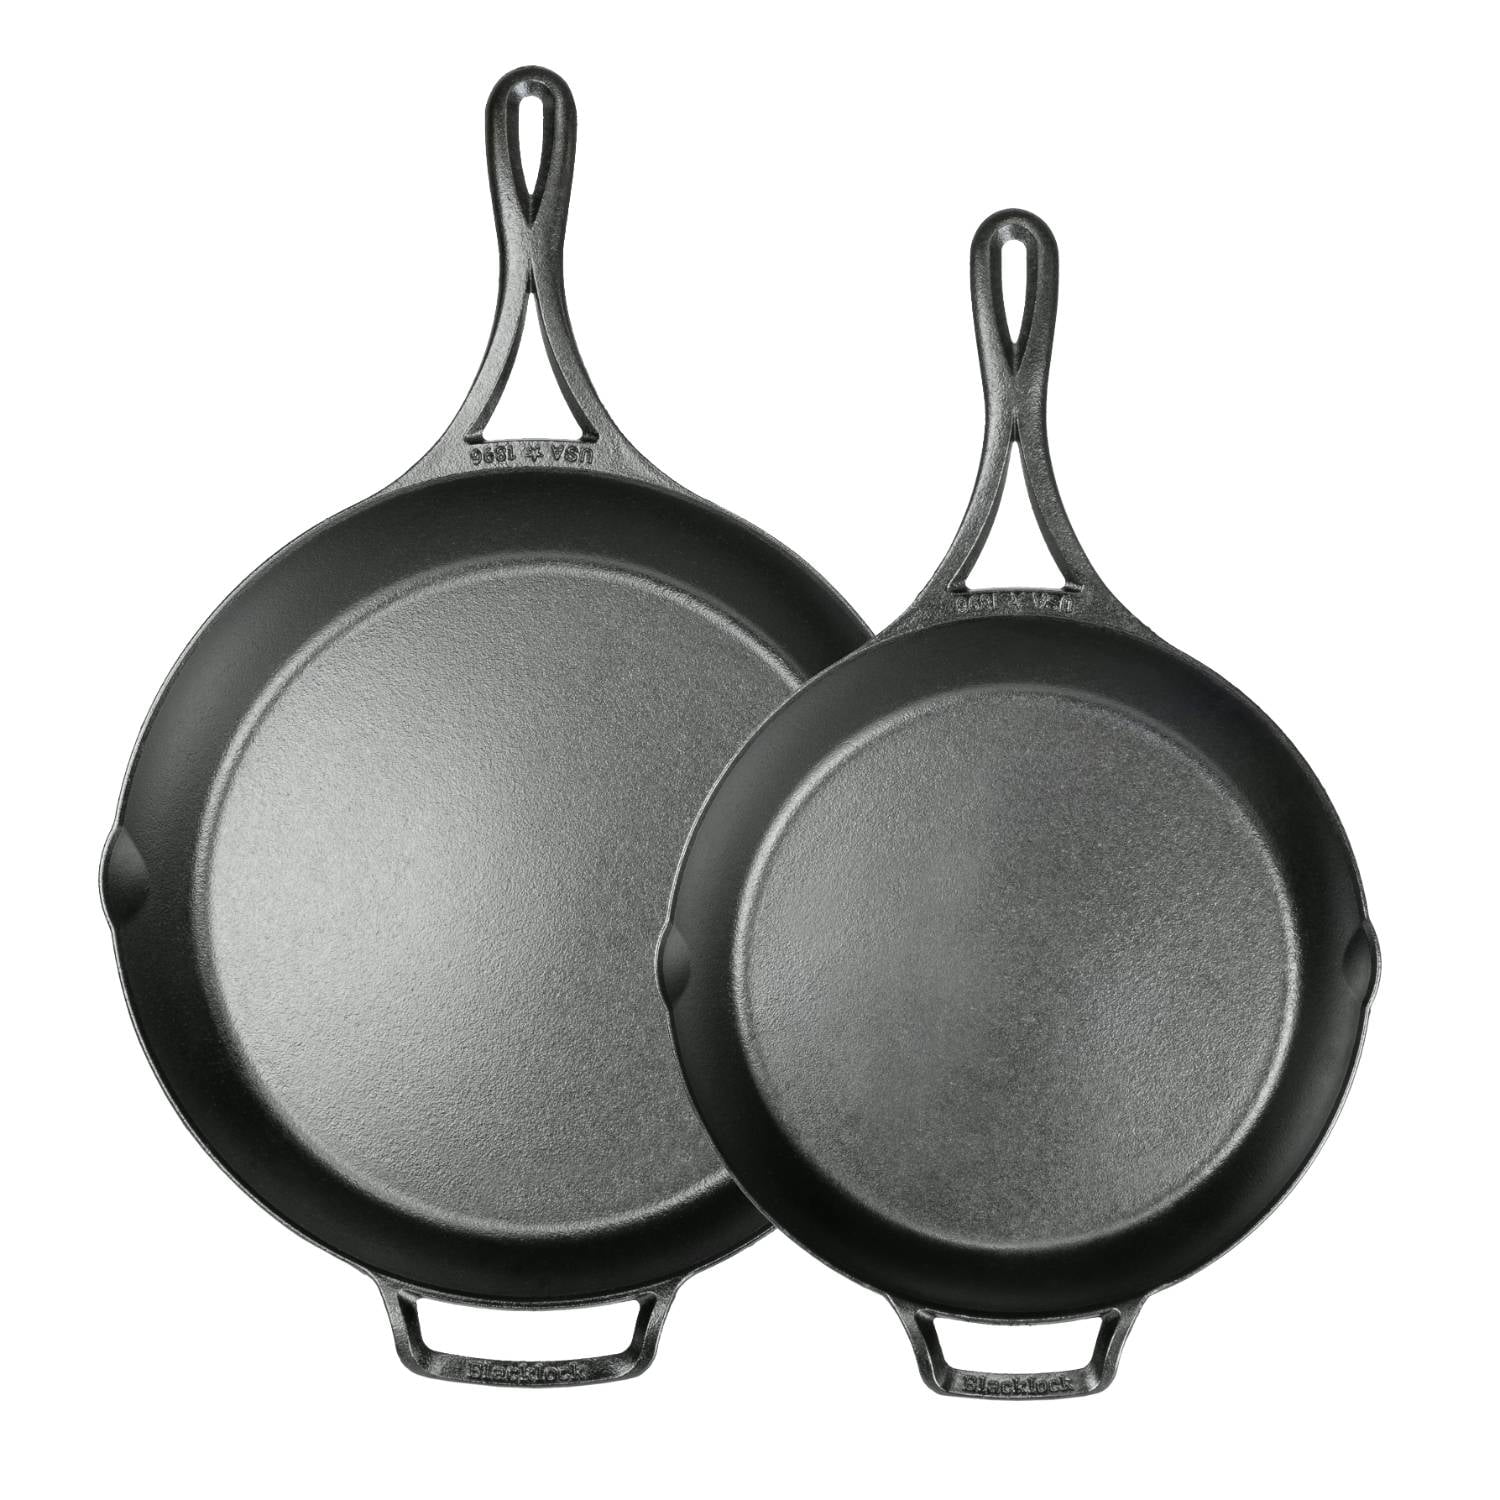 Lodge 12 in. Cast Iron Skillet in Black with Pour Spout L10SKSTOT